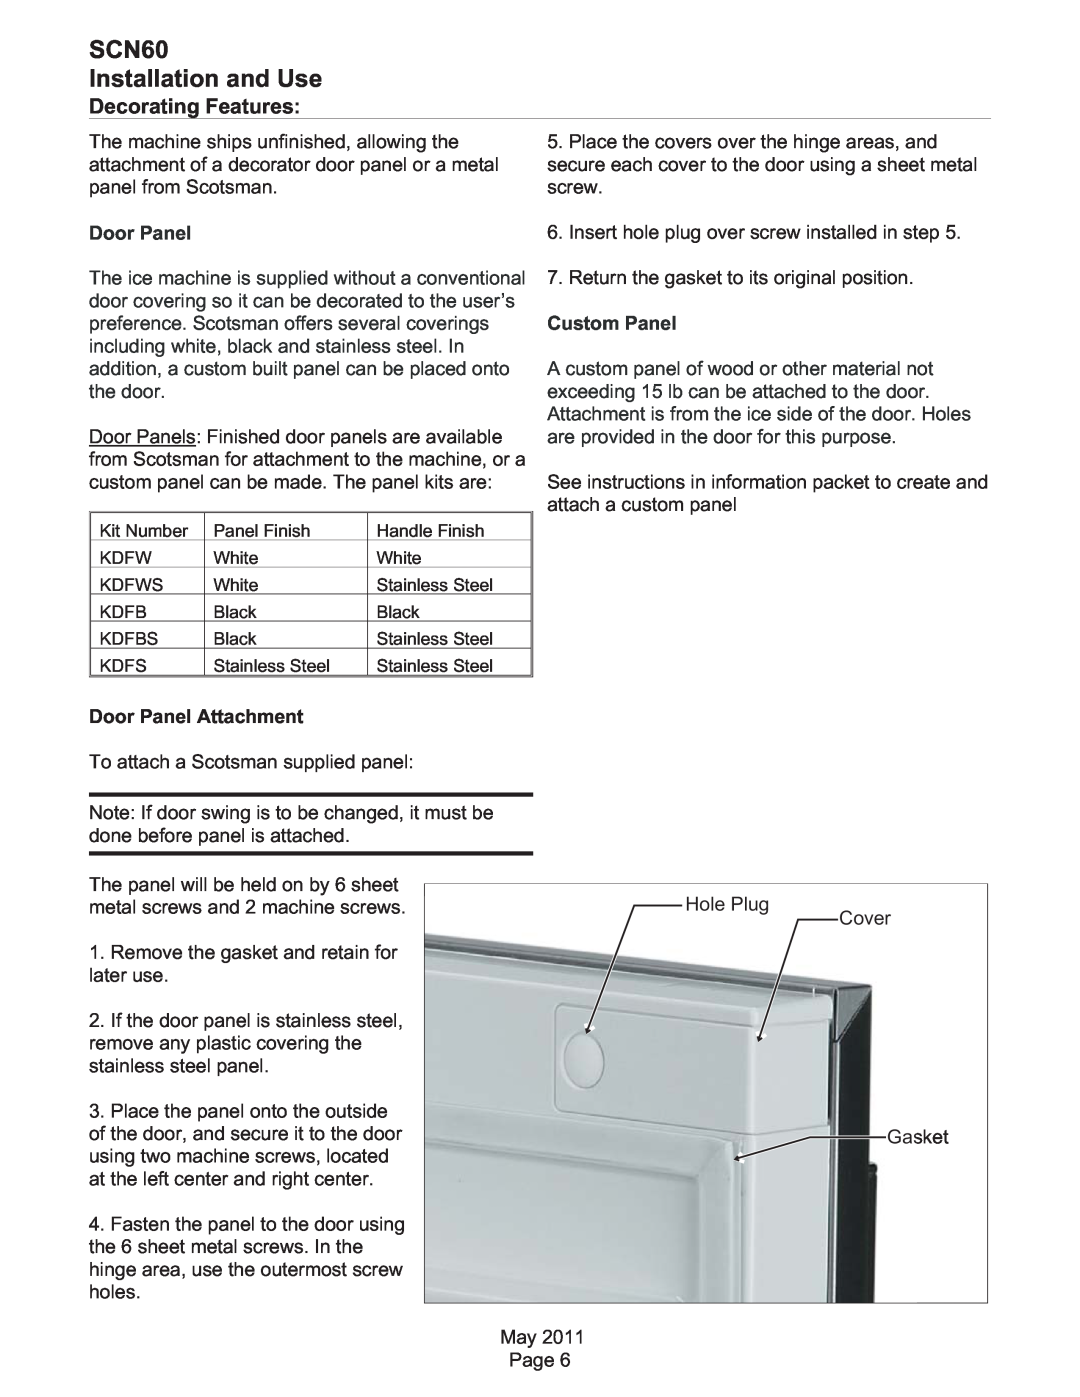 Scotsman Ice dimensions Decorating Features, Custom Panel, Door Panel Attachment, SCN60 Installation and Use 